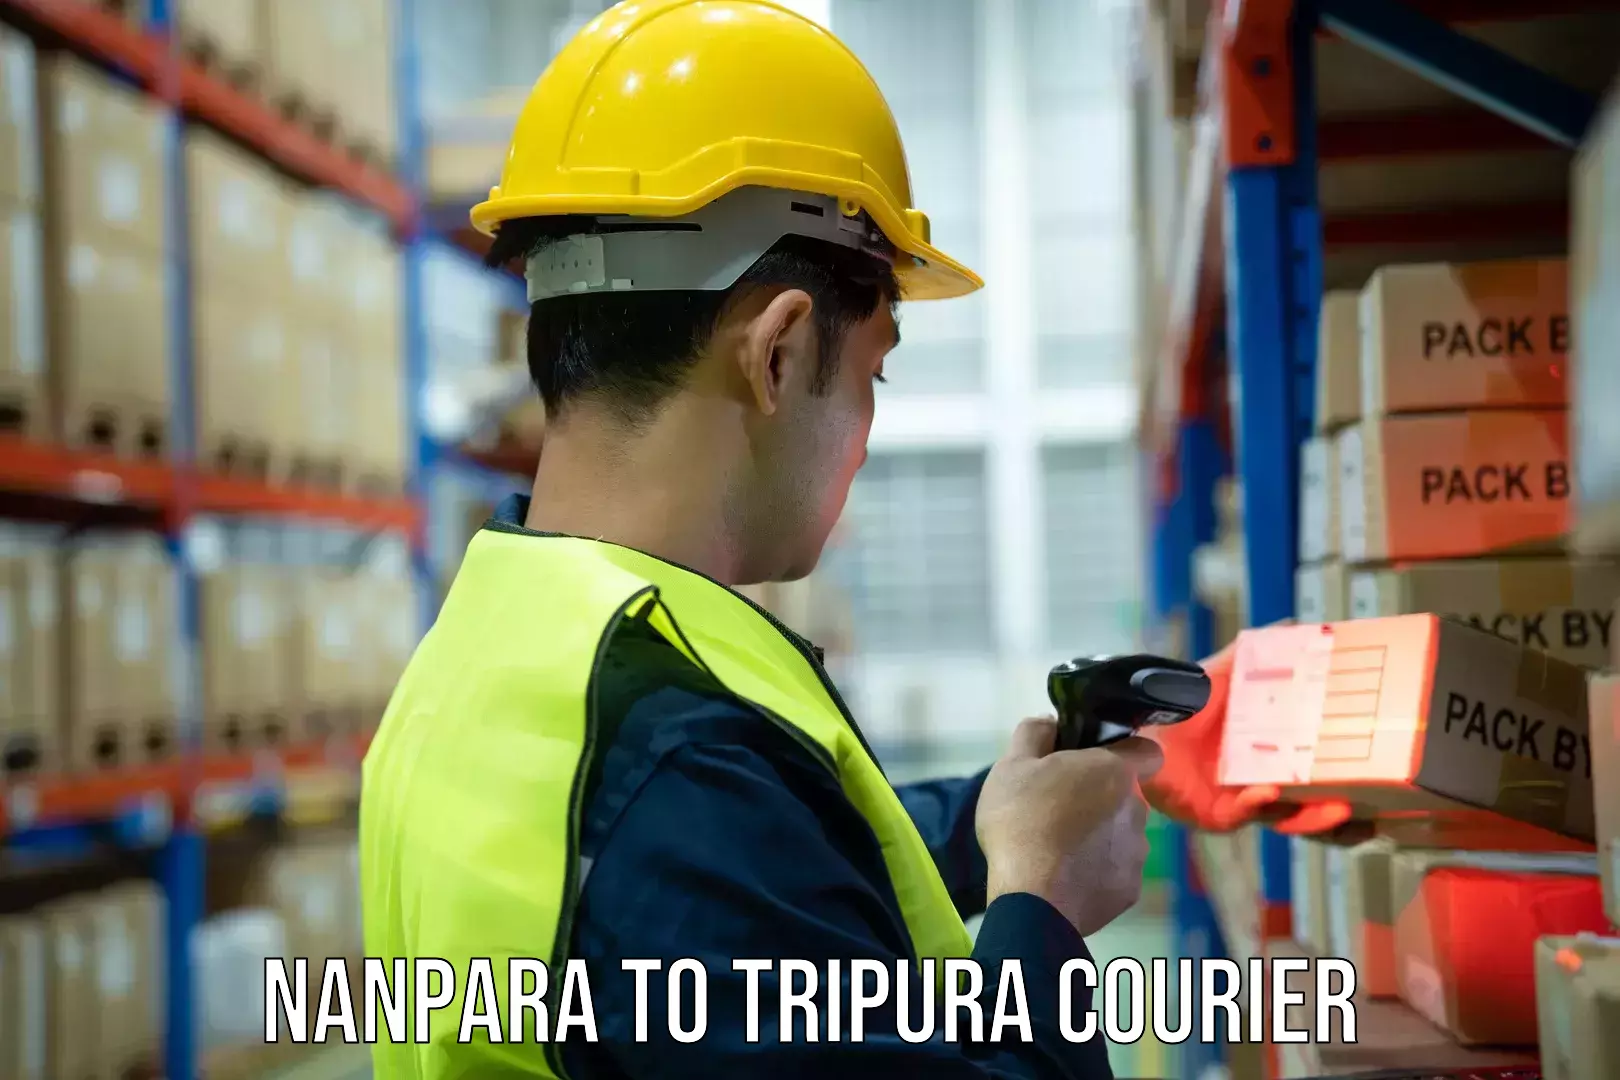 Courier service partnerships in Nanpara to Udaipur Tripura